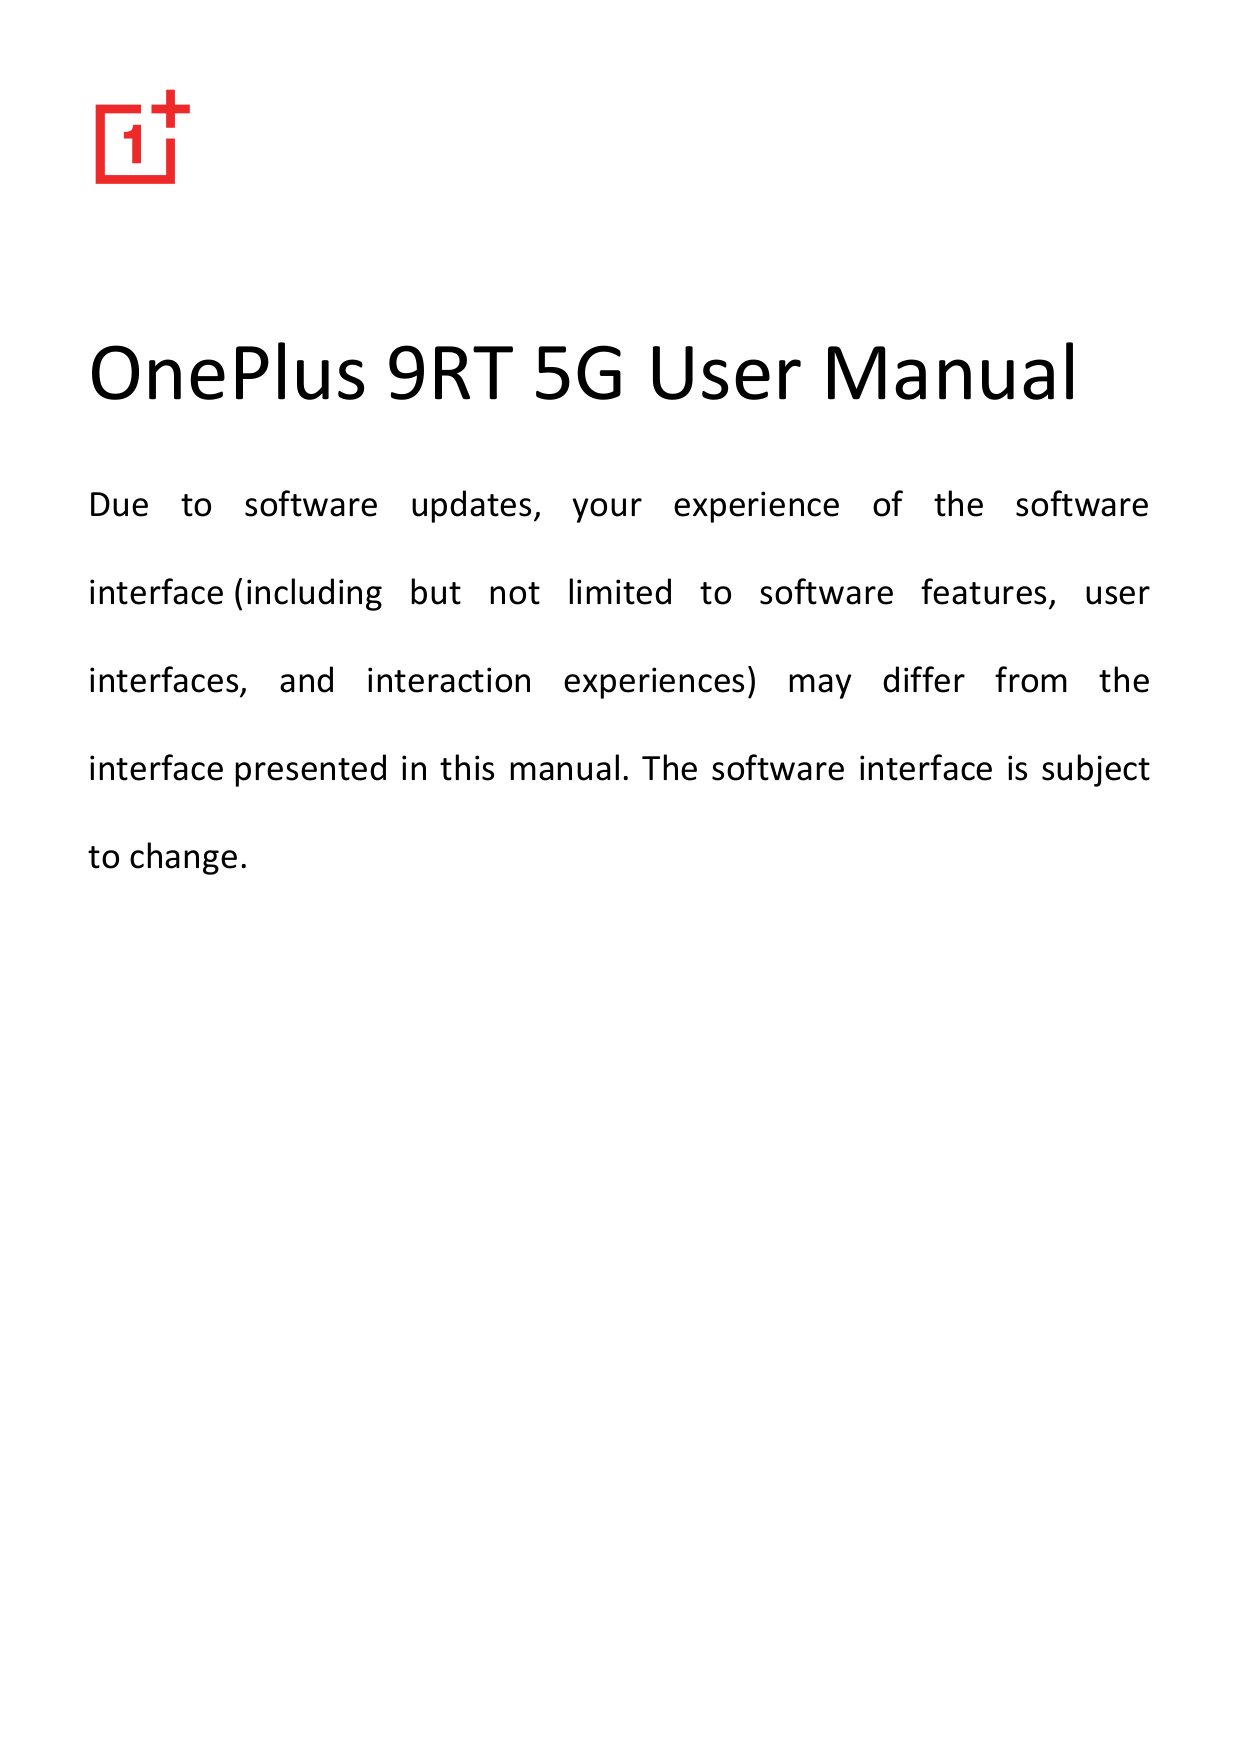 OnePlus 9RT 5G User ManualDue to software updates, your experience of the softwareinterface (including but not limited to softwa